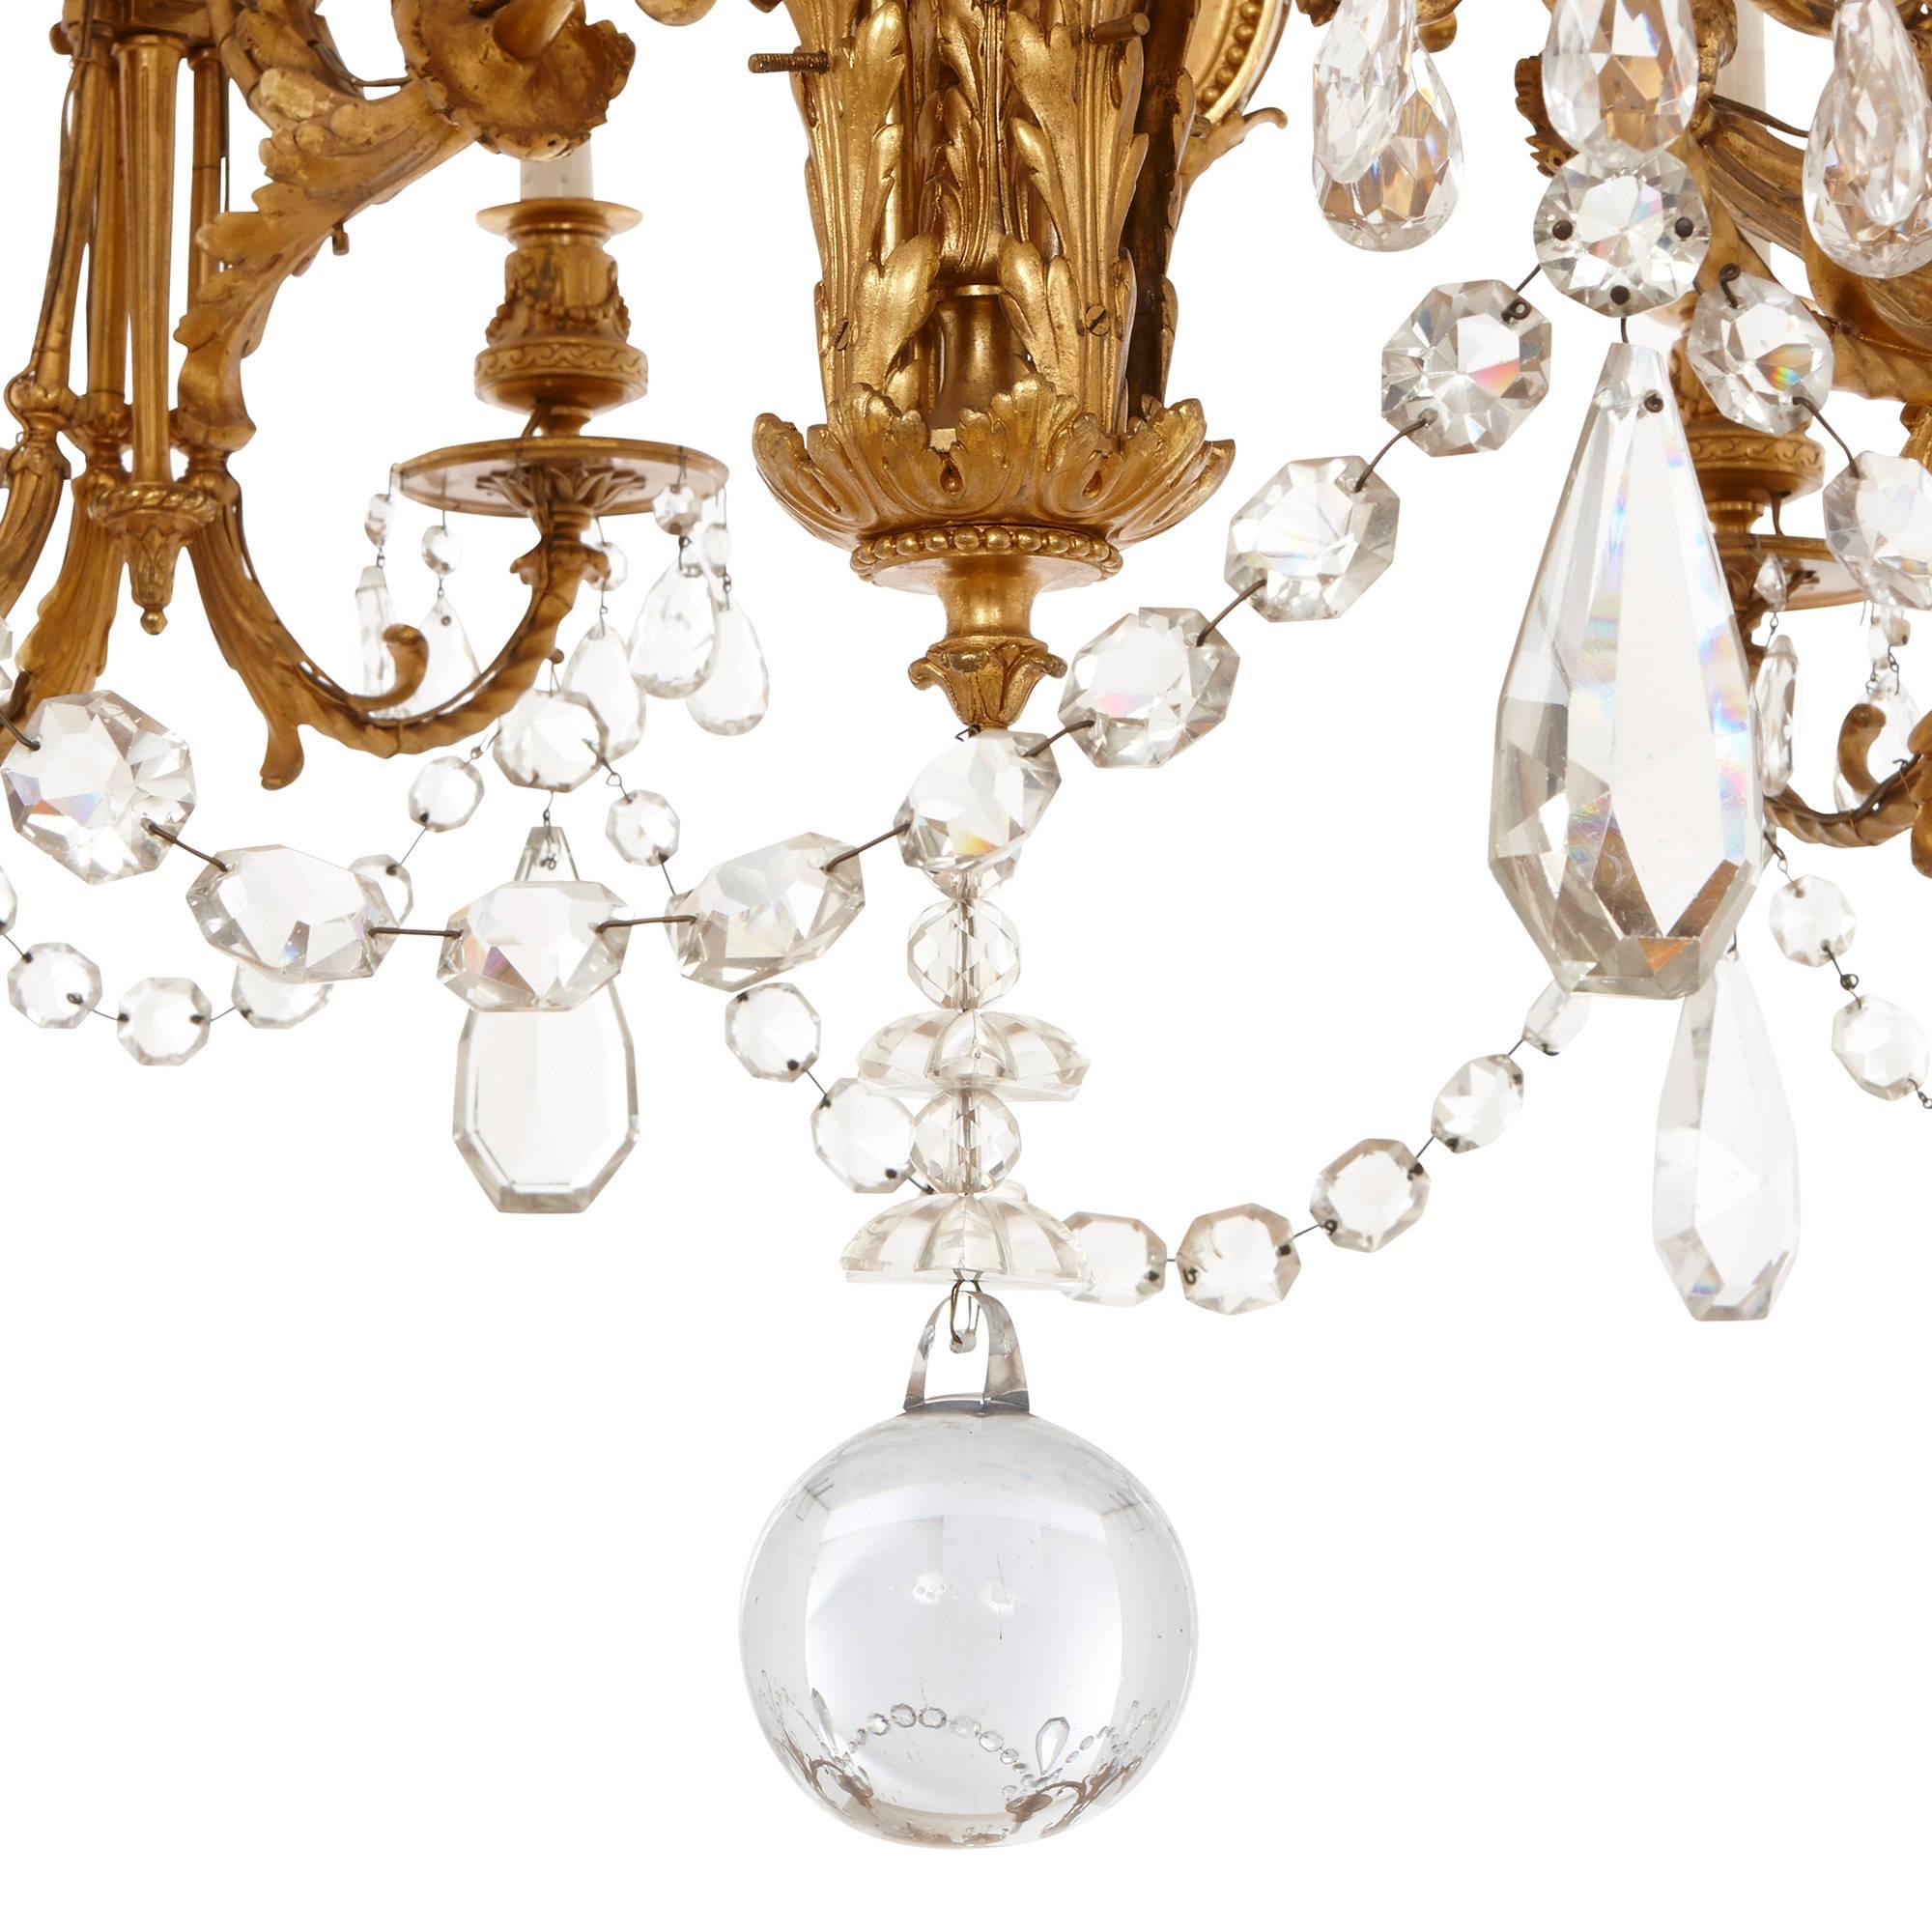 19th Century French Antique Neoclassical Style Gilt Bronze and Cut-Glass Chandelier